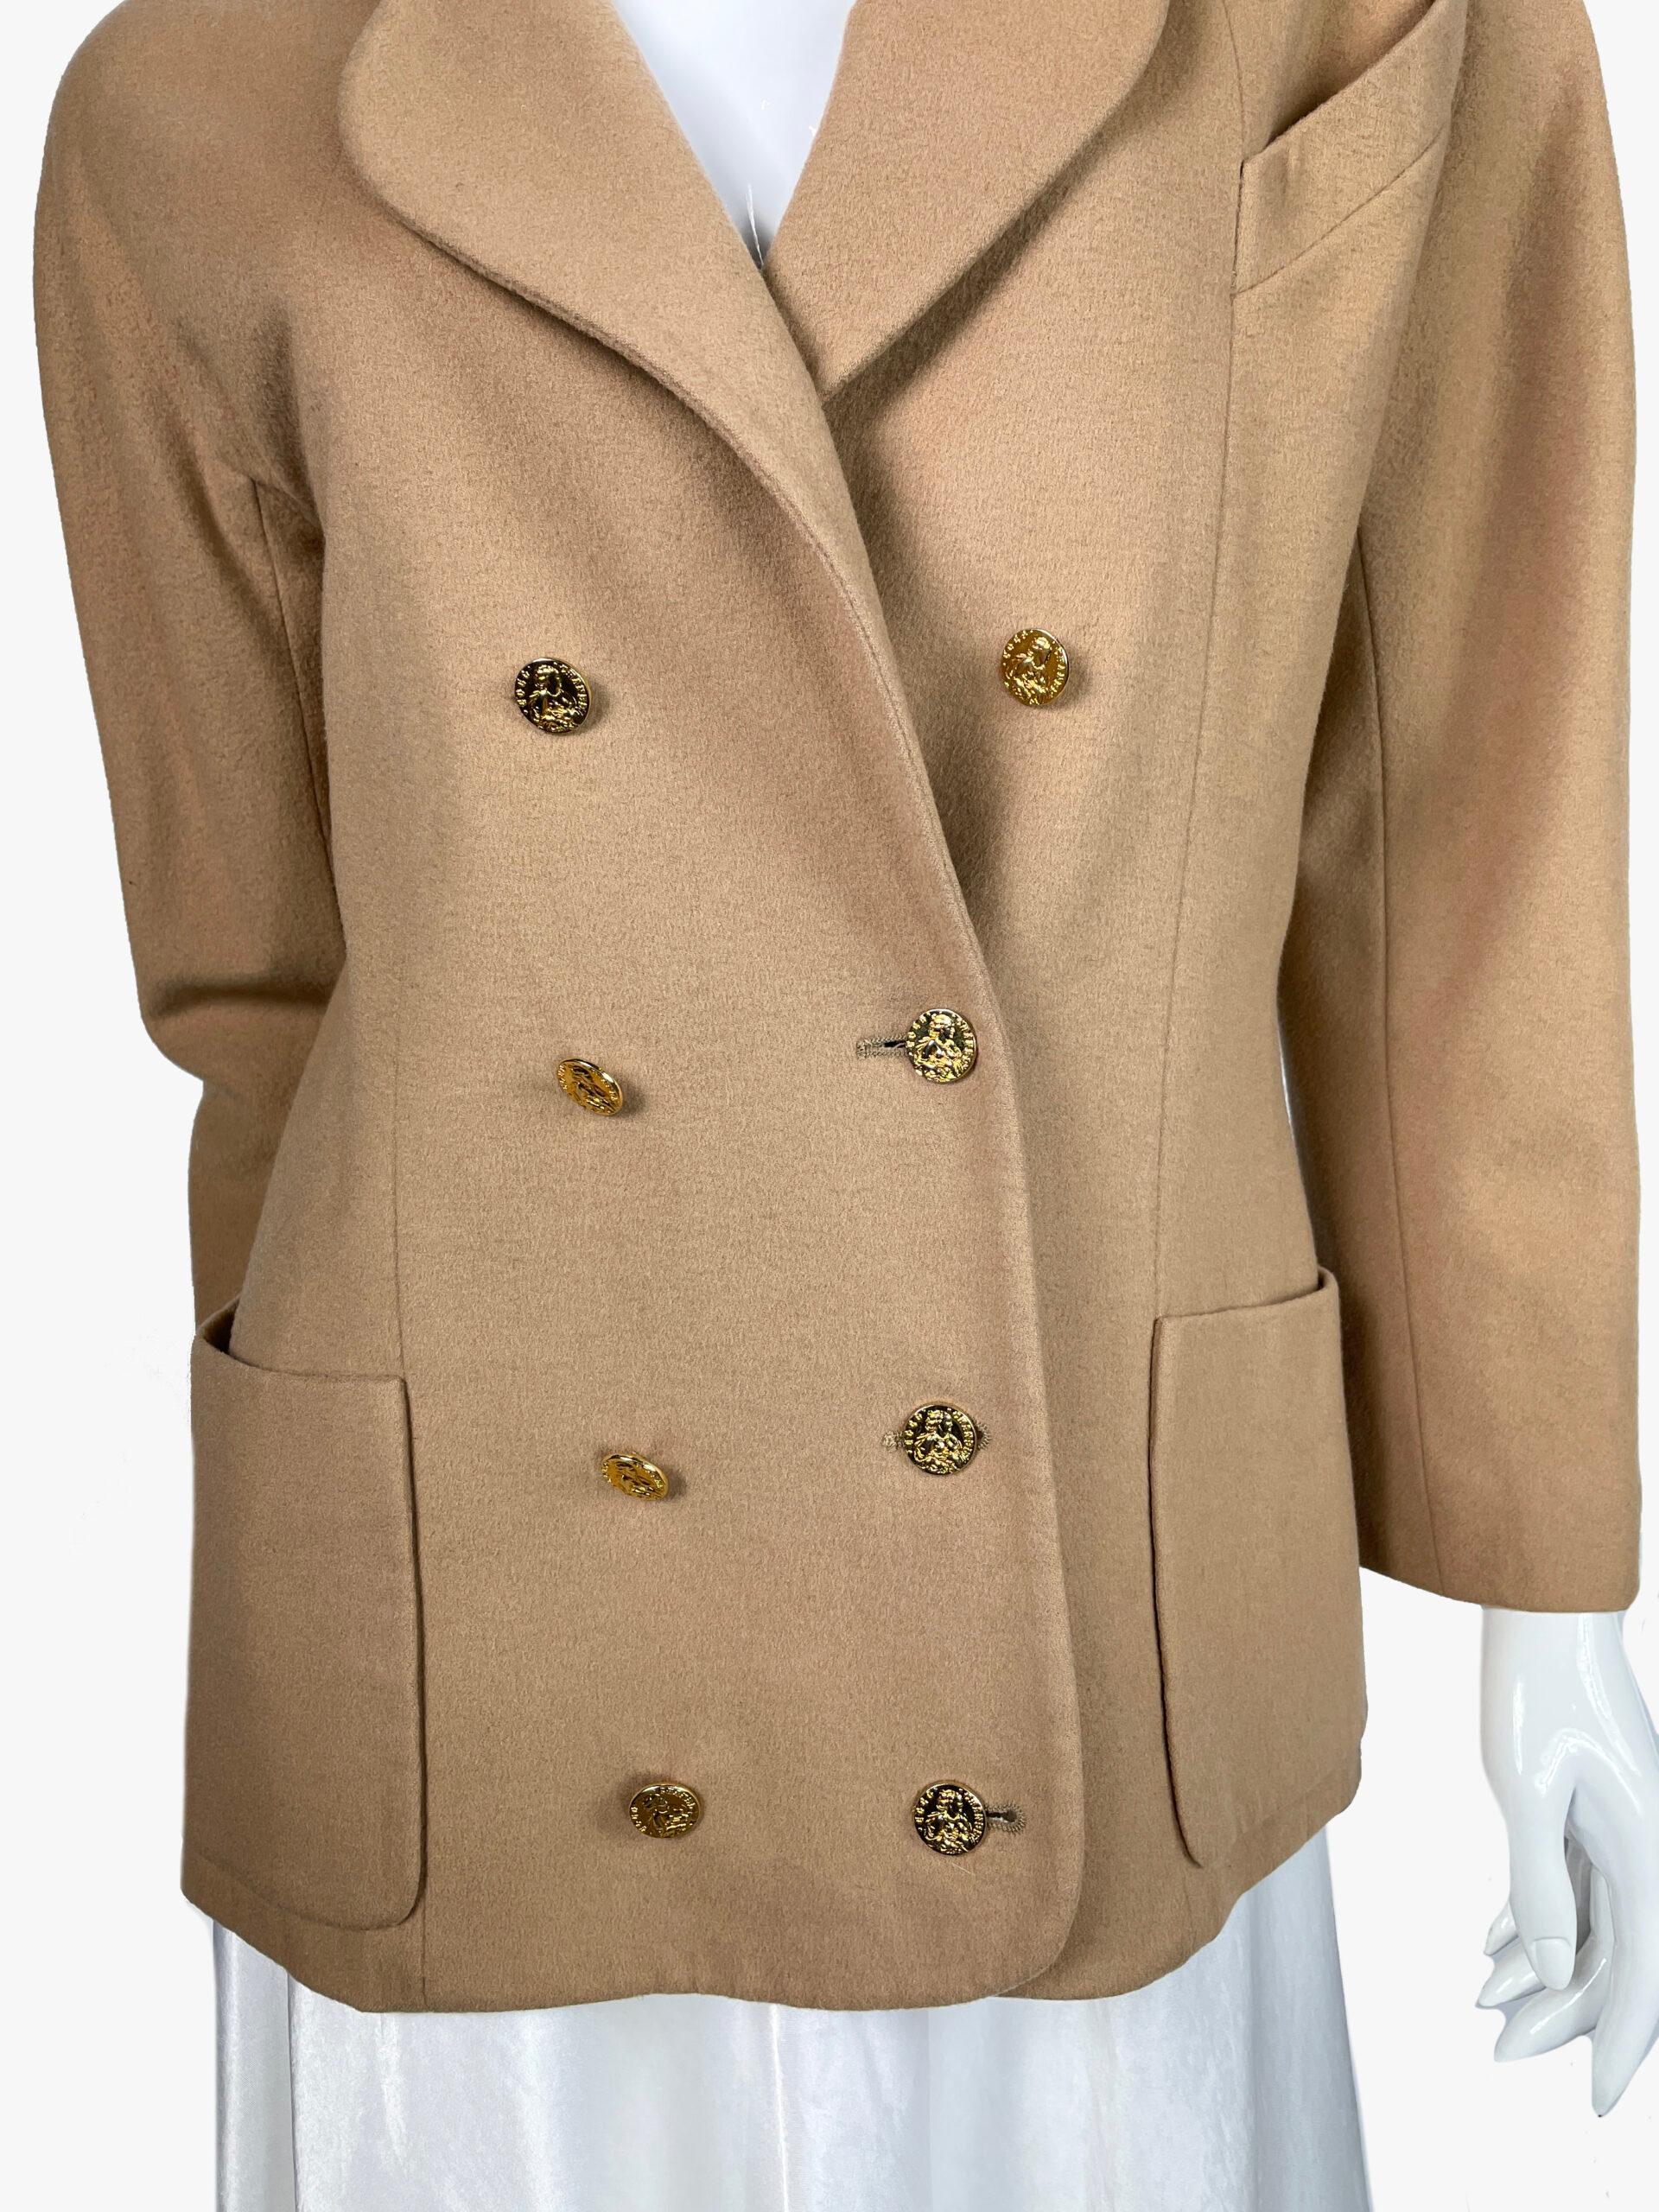 Chanel Vintage Beige Button Boutique Blazer, 1980s In Good Condition For Sale In New York, NY